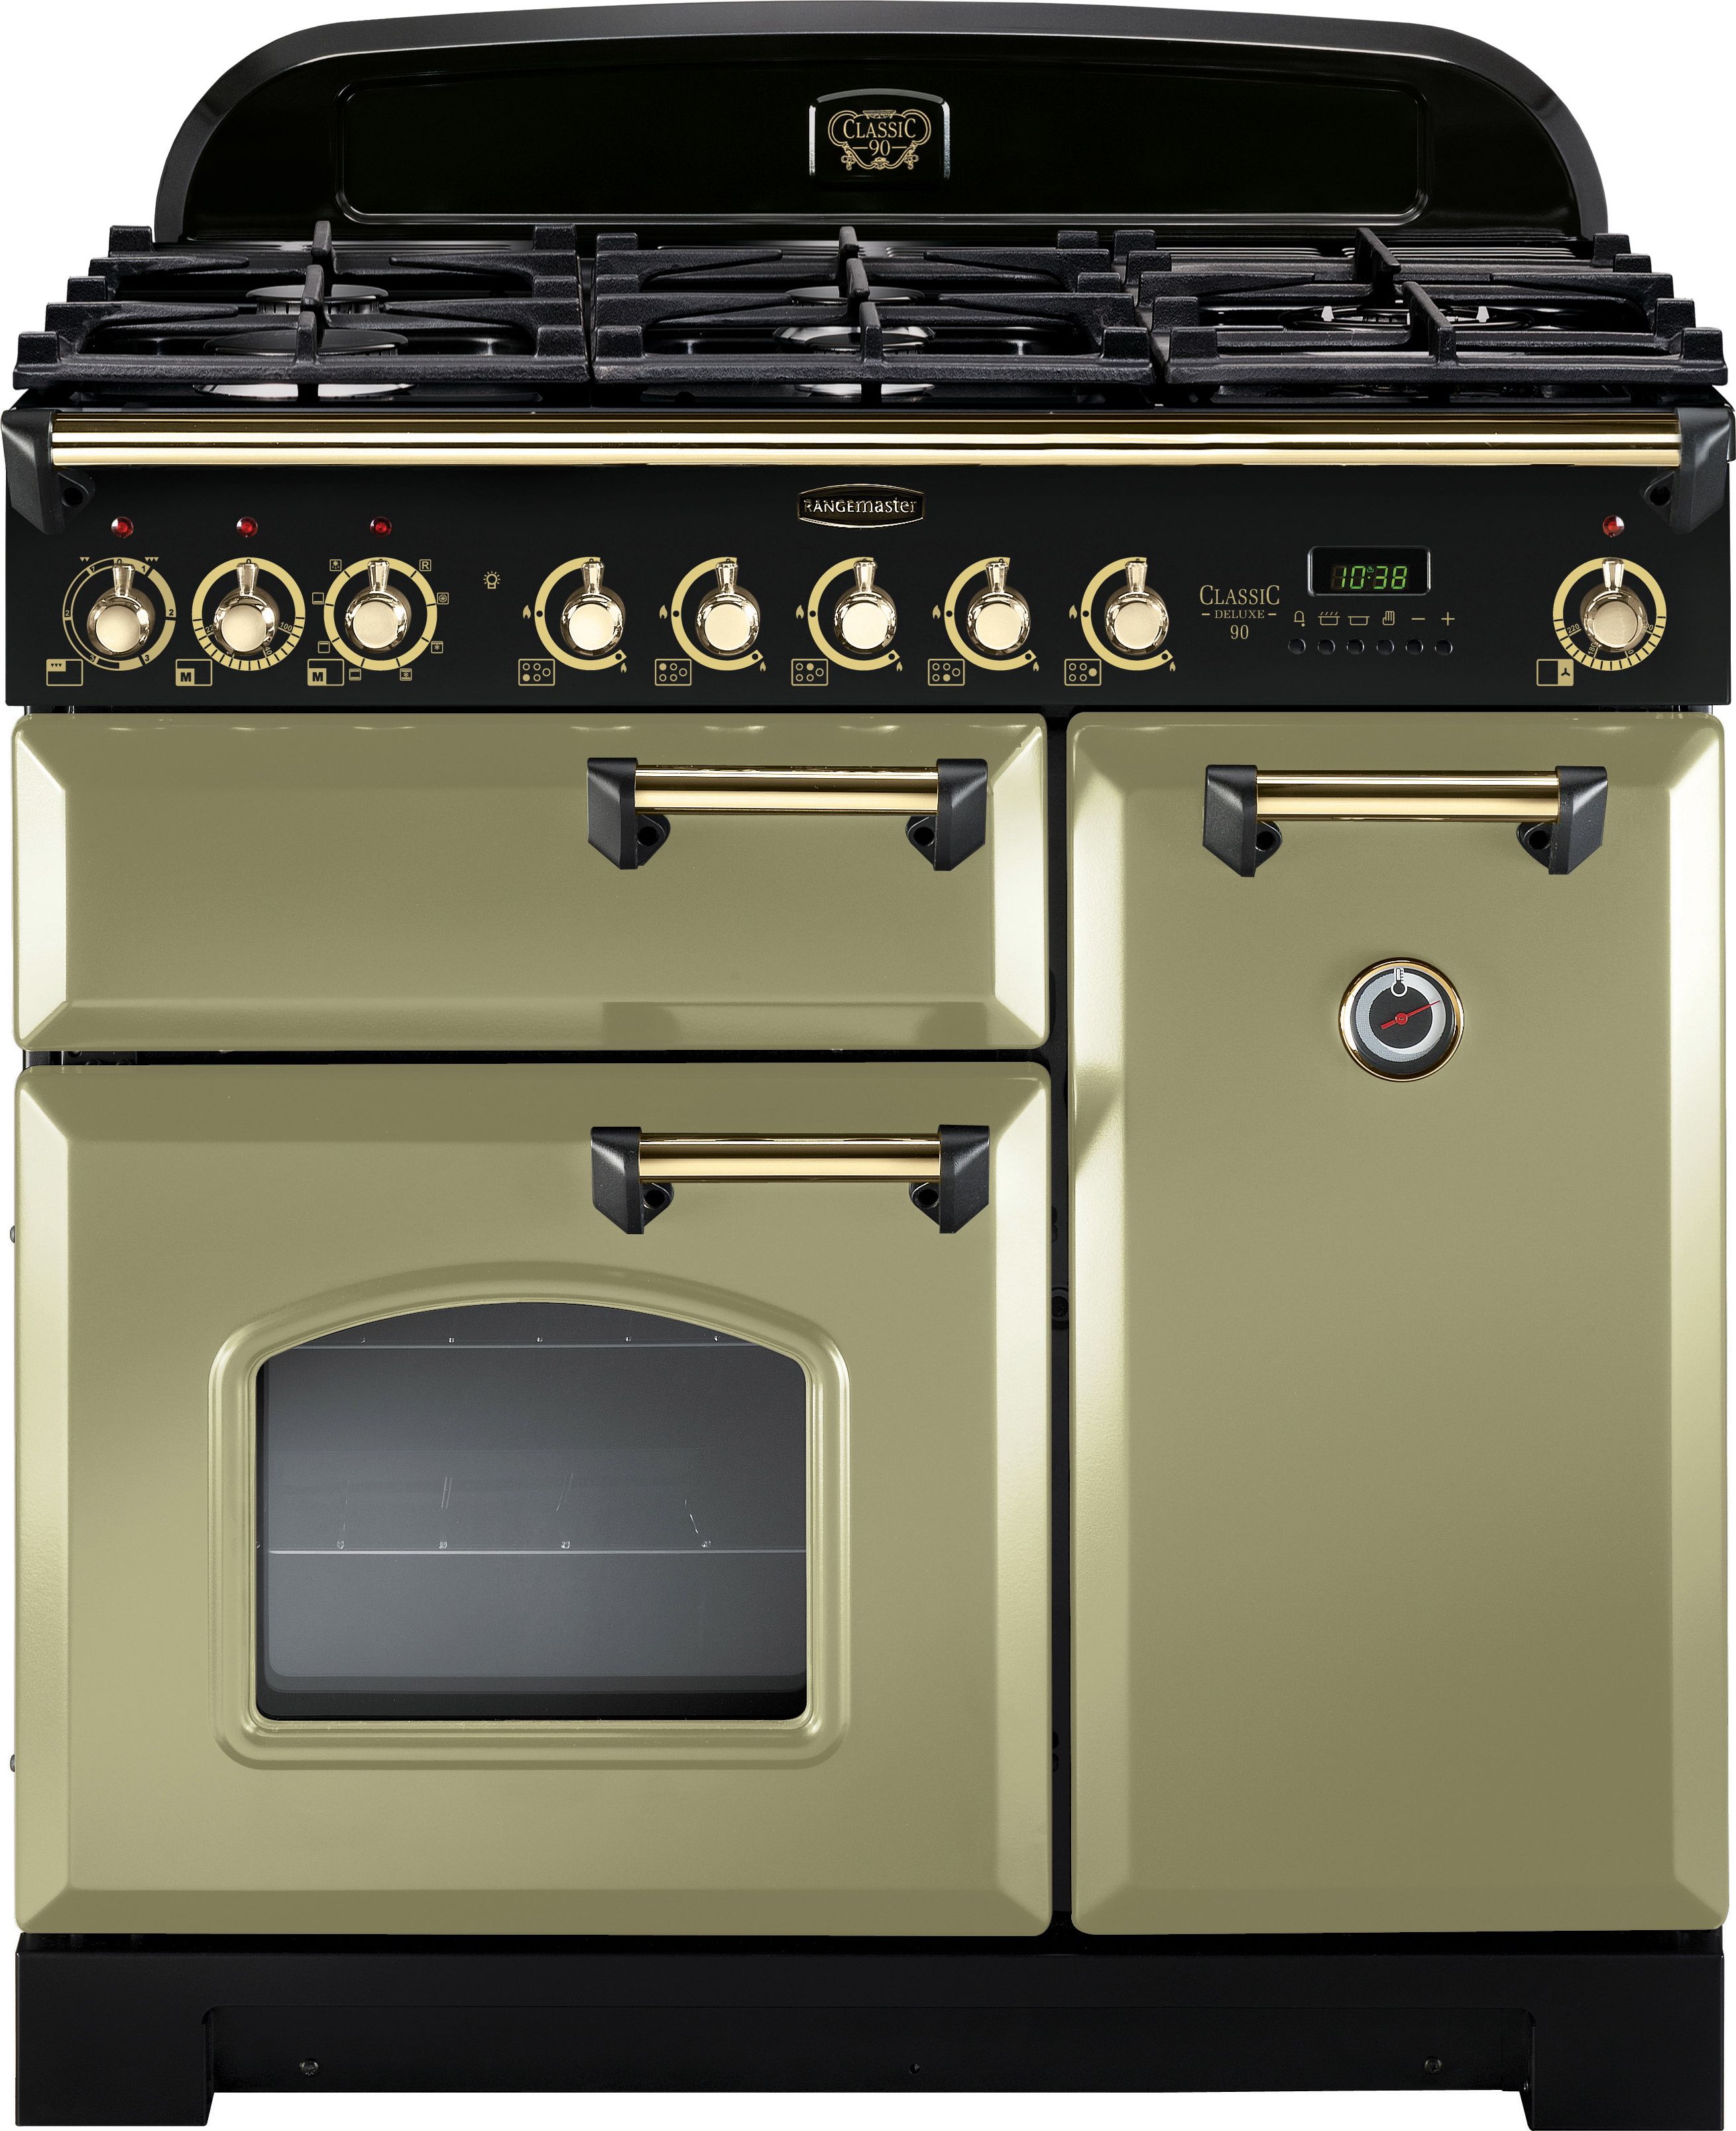 Rangemaster Classic Deluxe CDL90DFFOG/B 90cm Dual Fuel Range Cooker - Olive Green / Brass - A/A Rated, Green